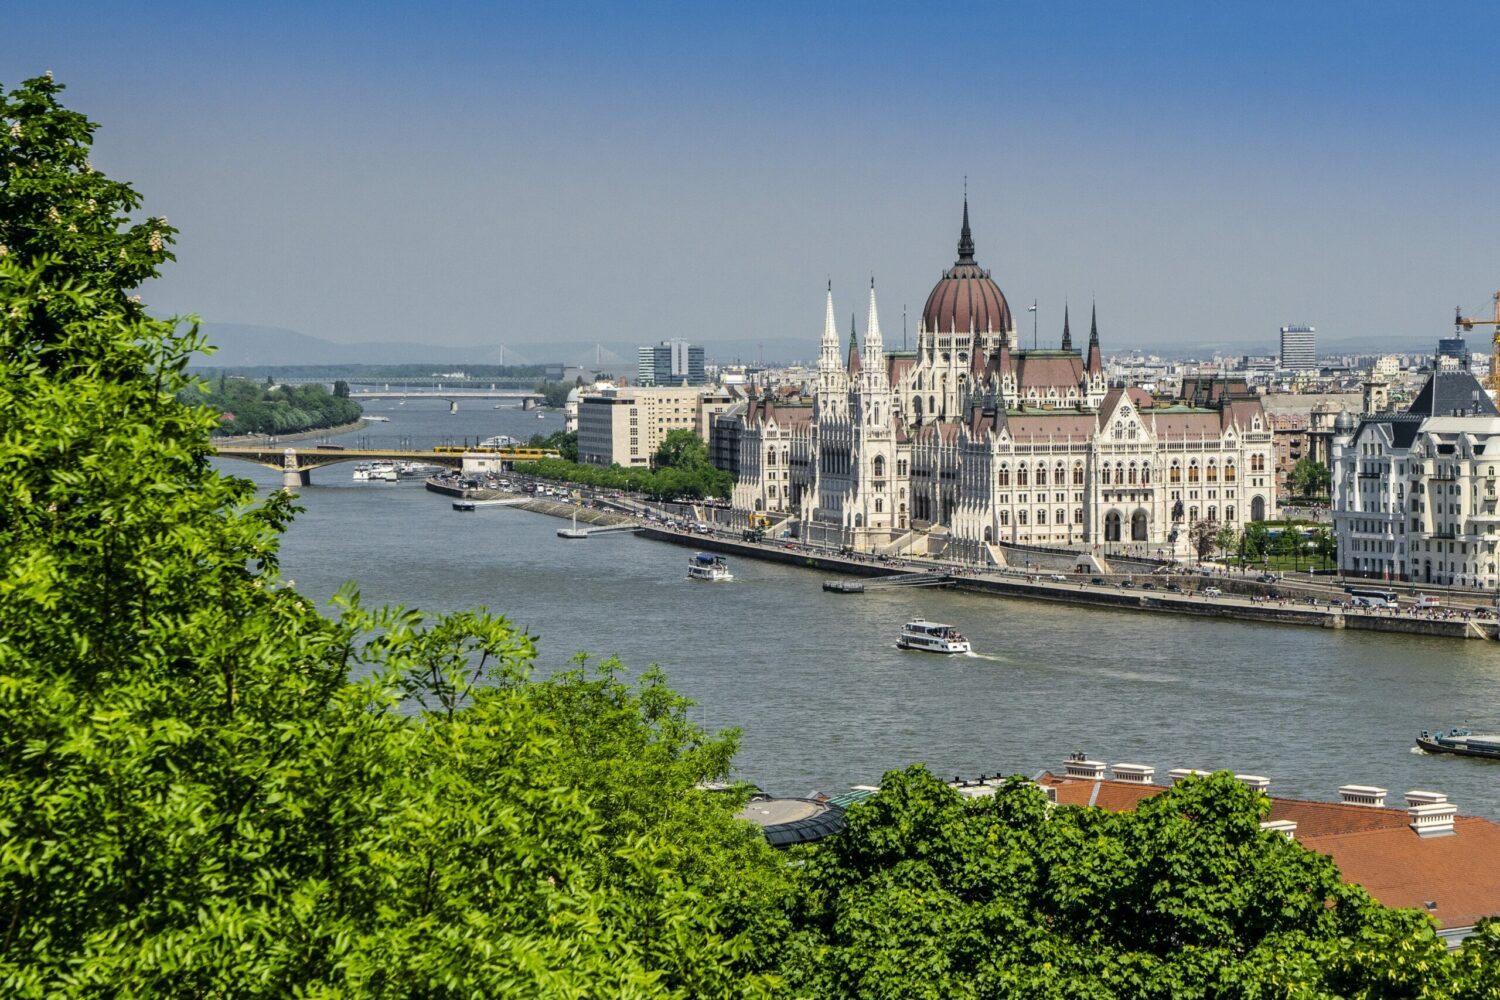 The image is looking down the river toward the Hungarian Parliament building